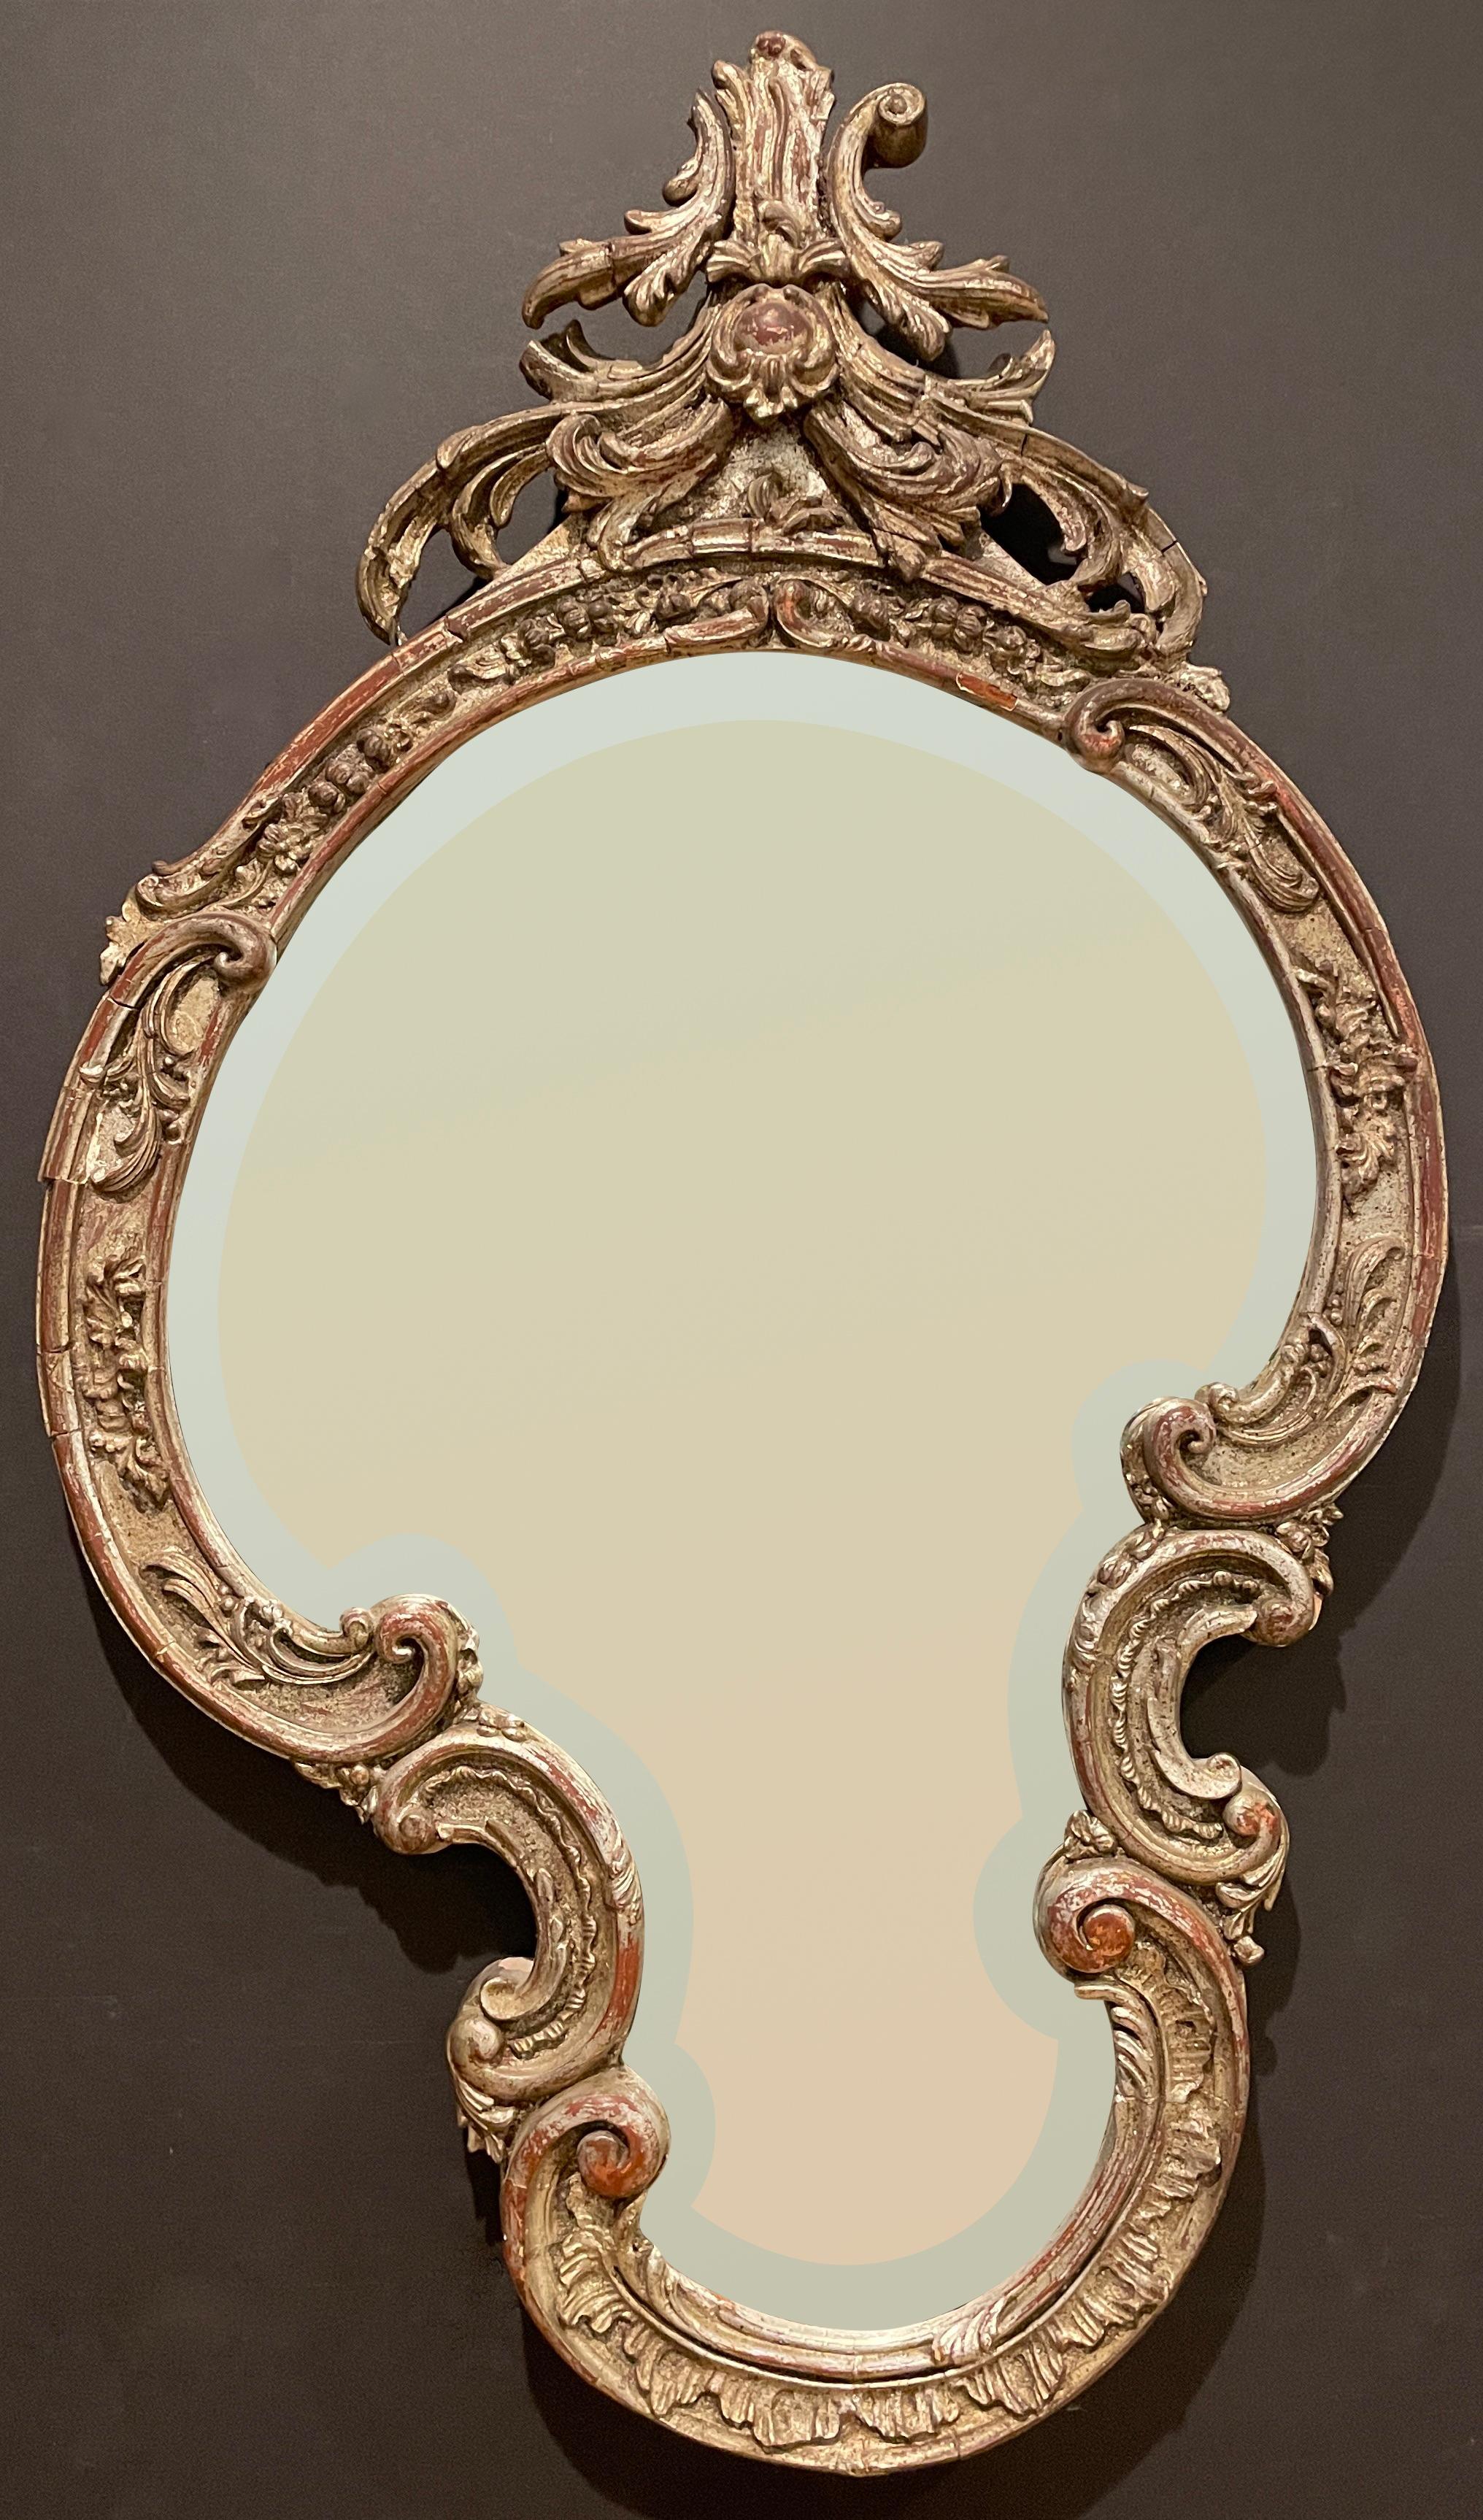 Beveled mirror in the Rococo style with hand carved elements throughout. Free-form shape with worn silver gilt finish and original antique mirror.